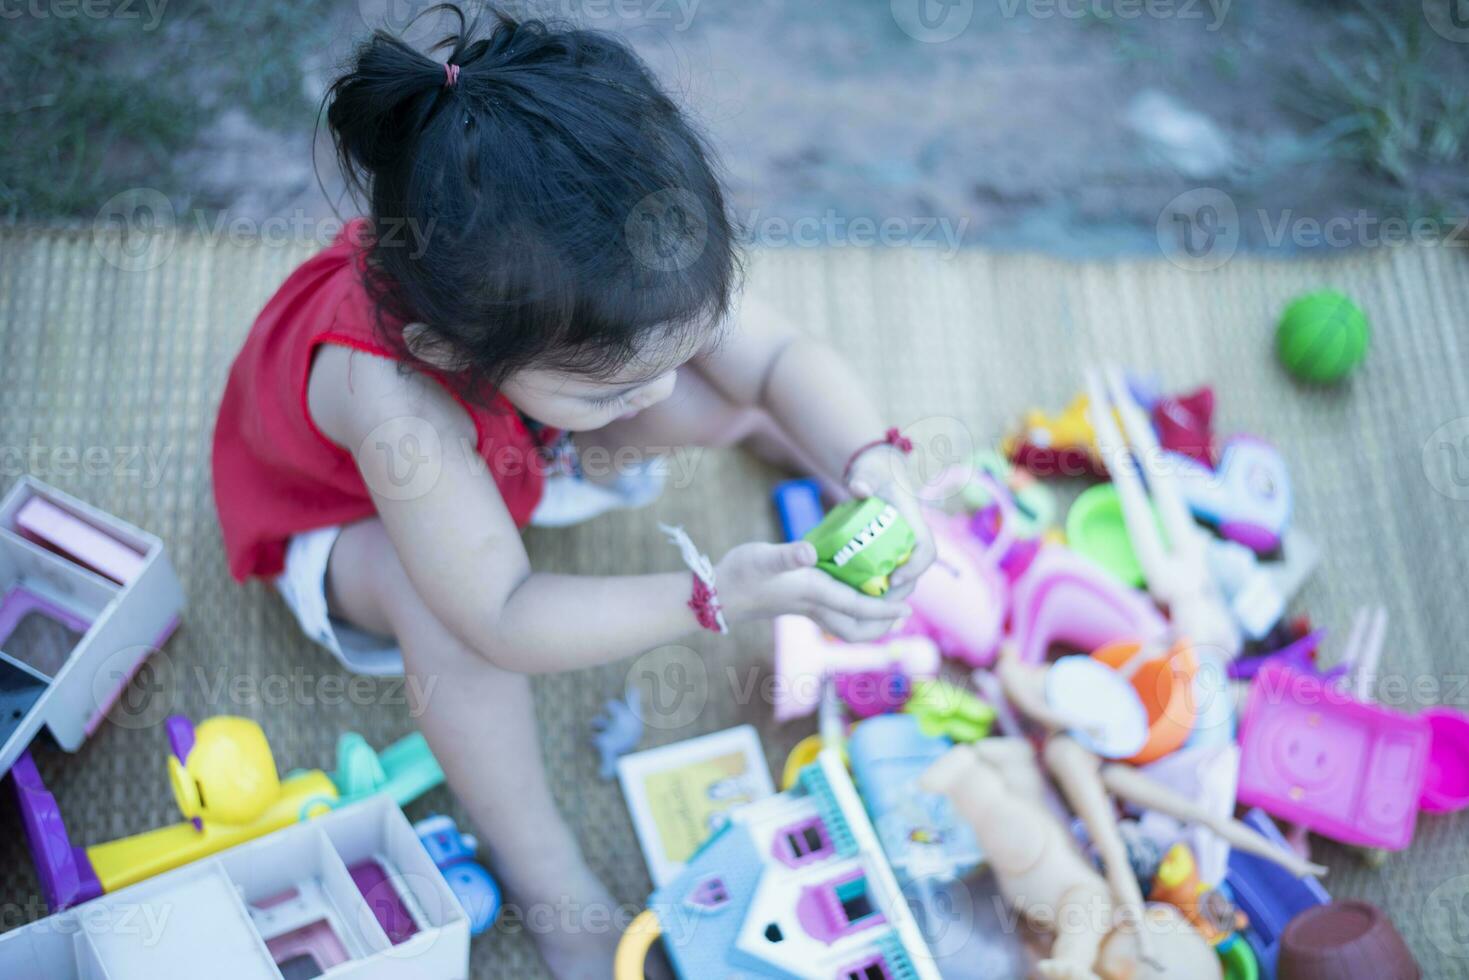 Children play with colorful toys Children play educational and creative toys and games for young children at home. photo